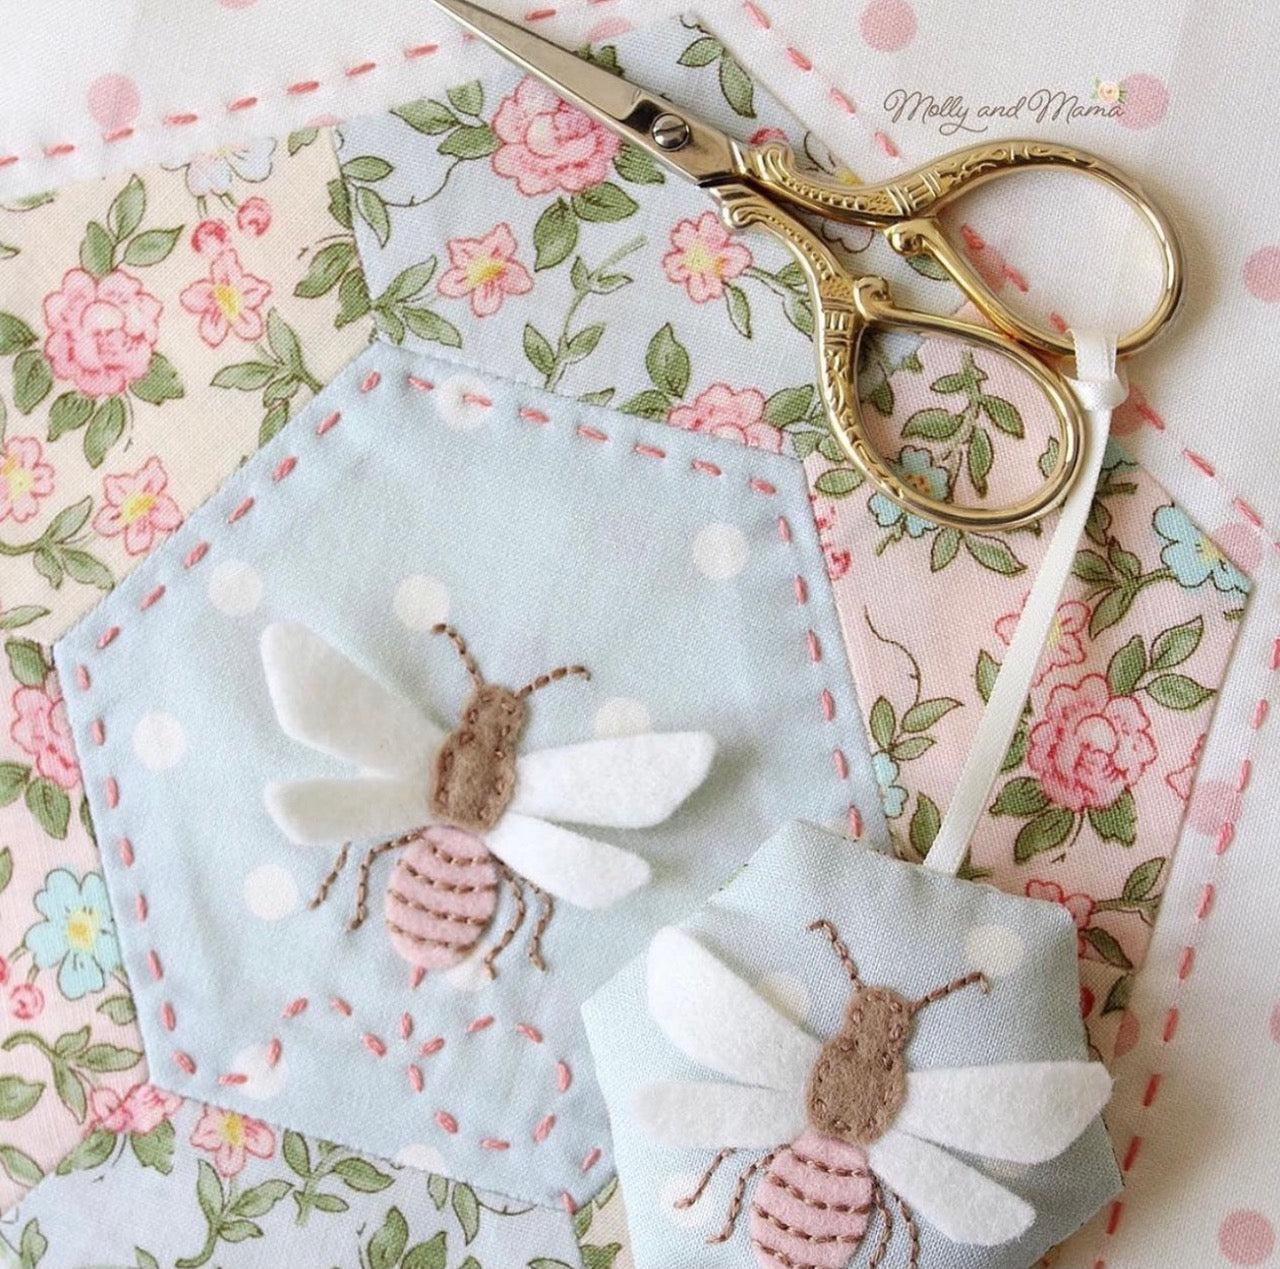 Rose & Violet`s Garden Fabric. Sweet Blossoms in cream